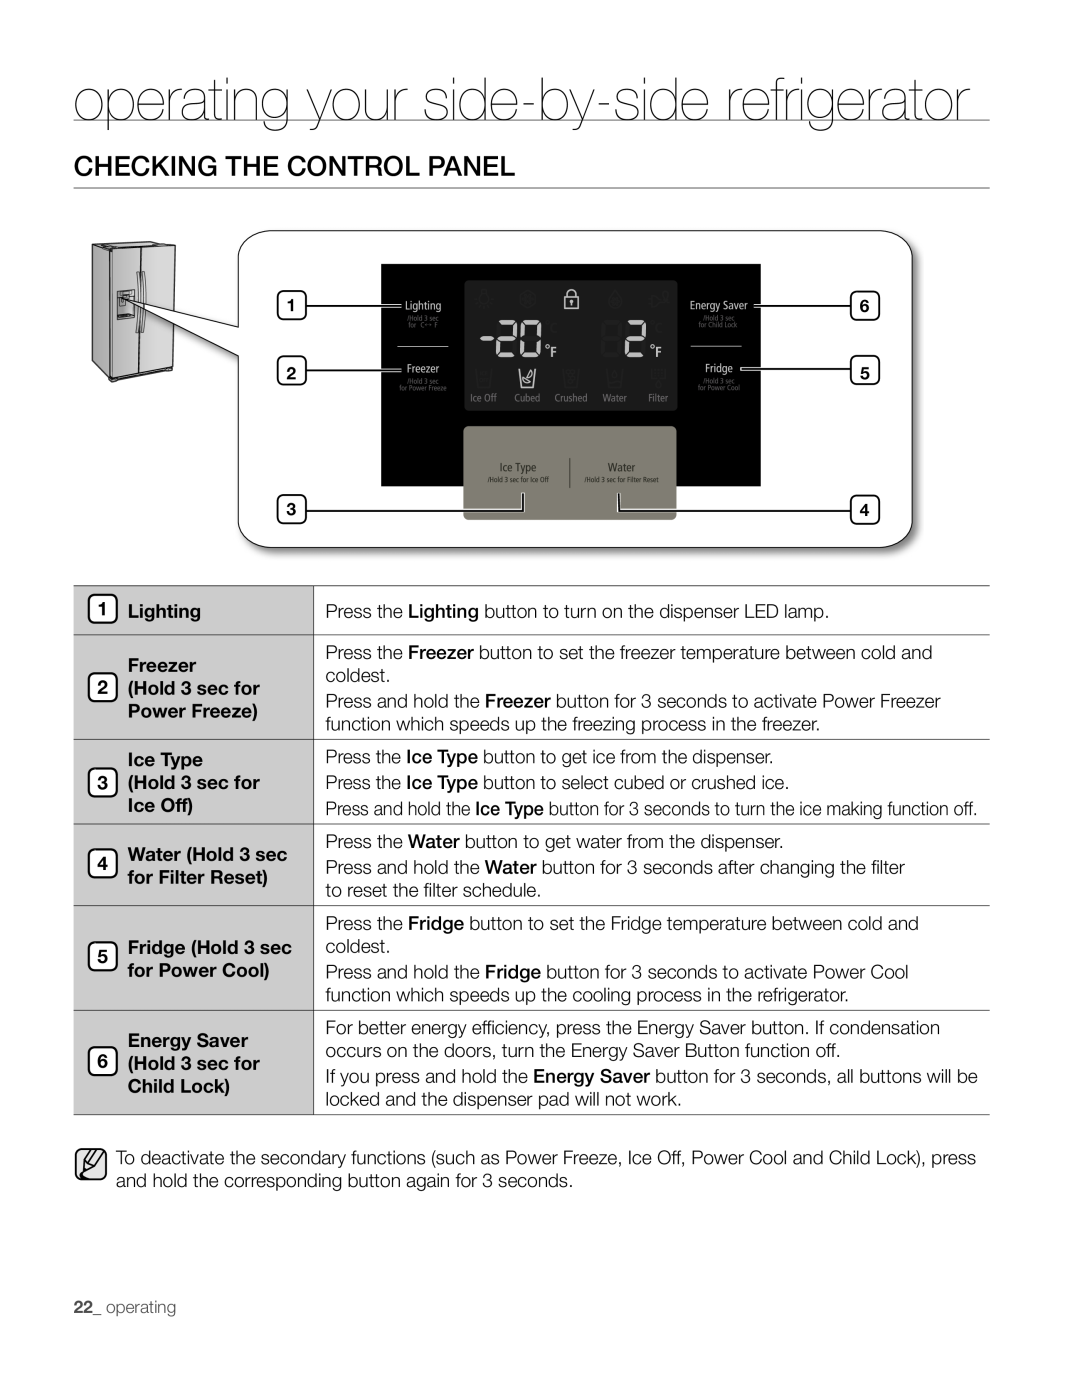 Samsung RS267TDPN user manual operating your side-by-side refrigerator, Checking The Control Panel 